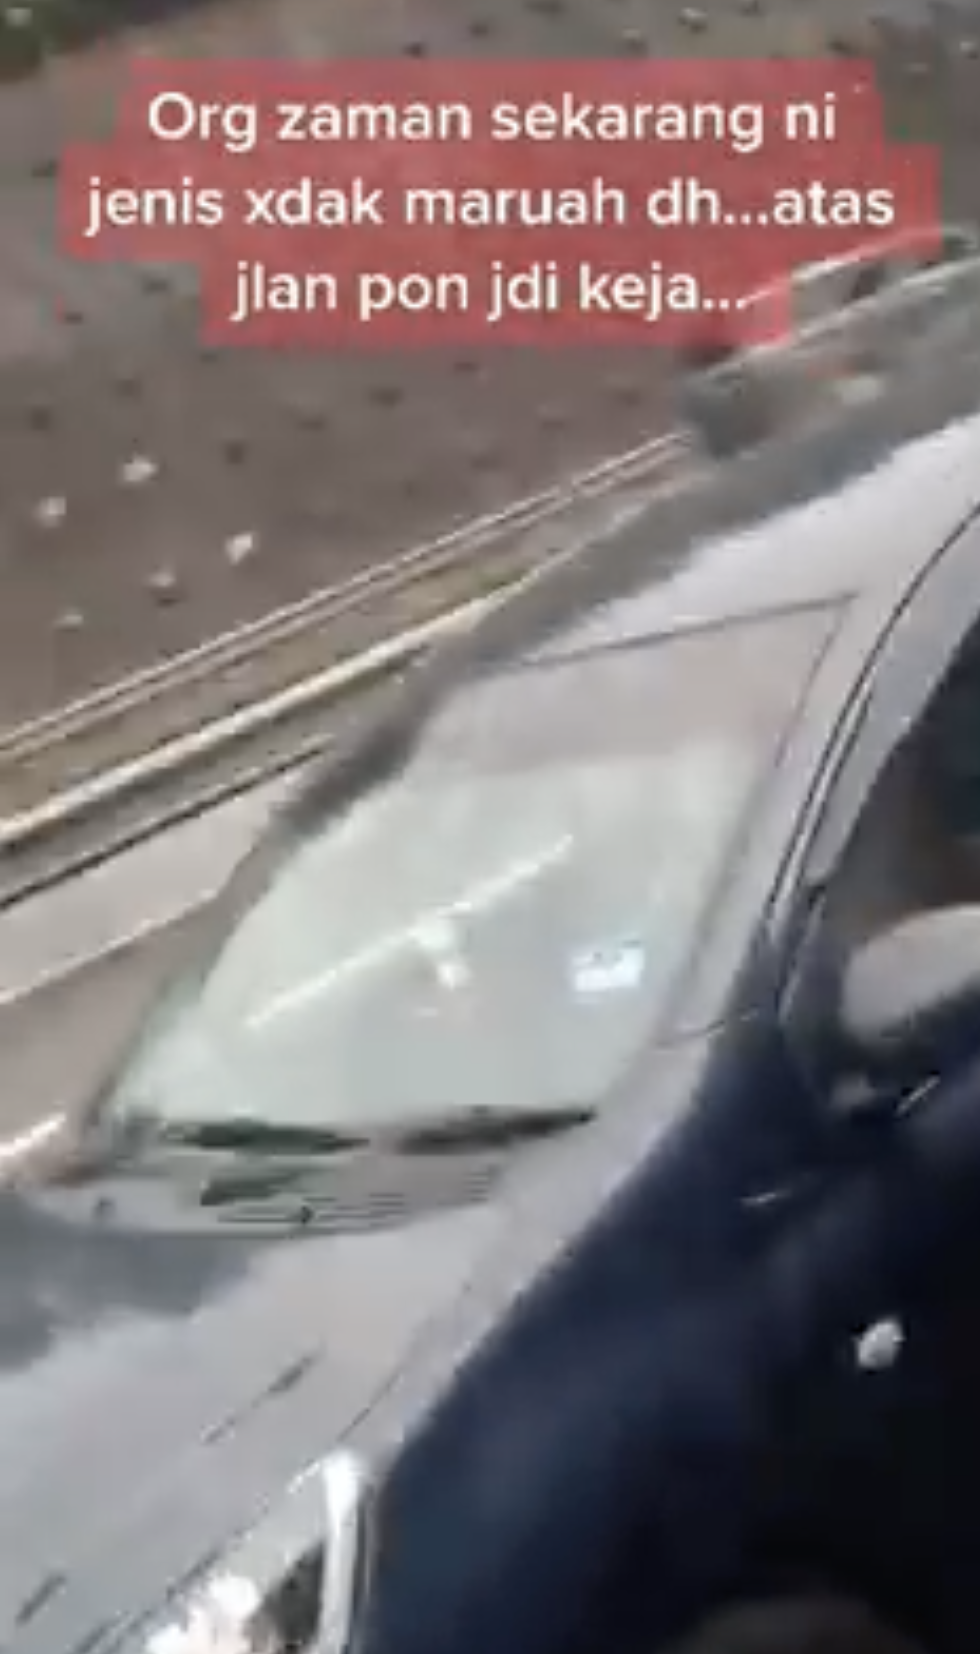 Couple caught having fun while driving on highway